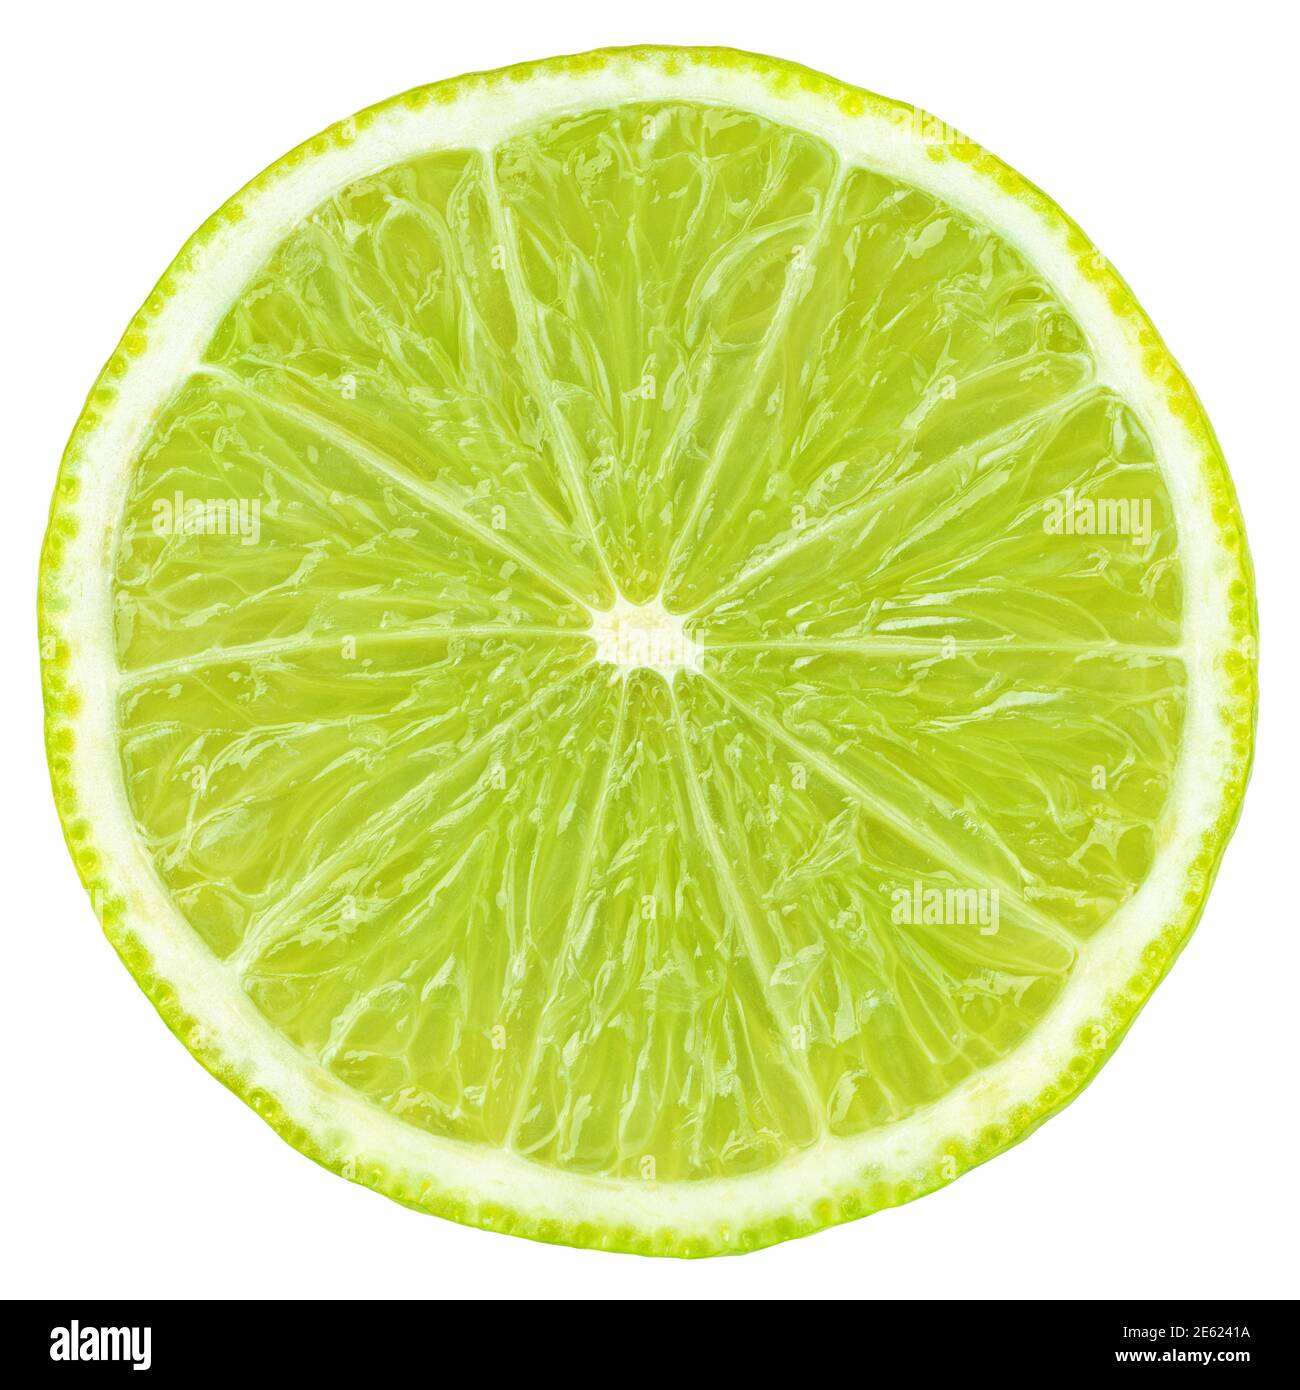 Top view of lime slice citrus fruit isolated on white background with clipping path. Stock Photo